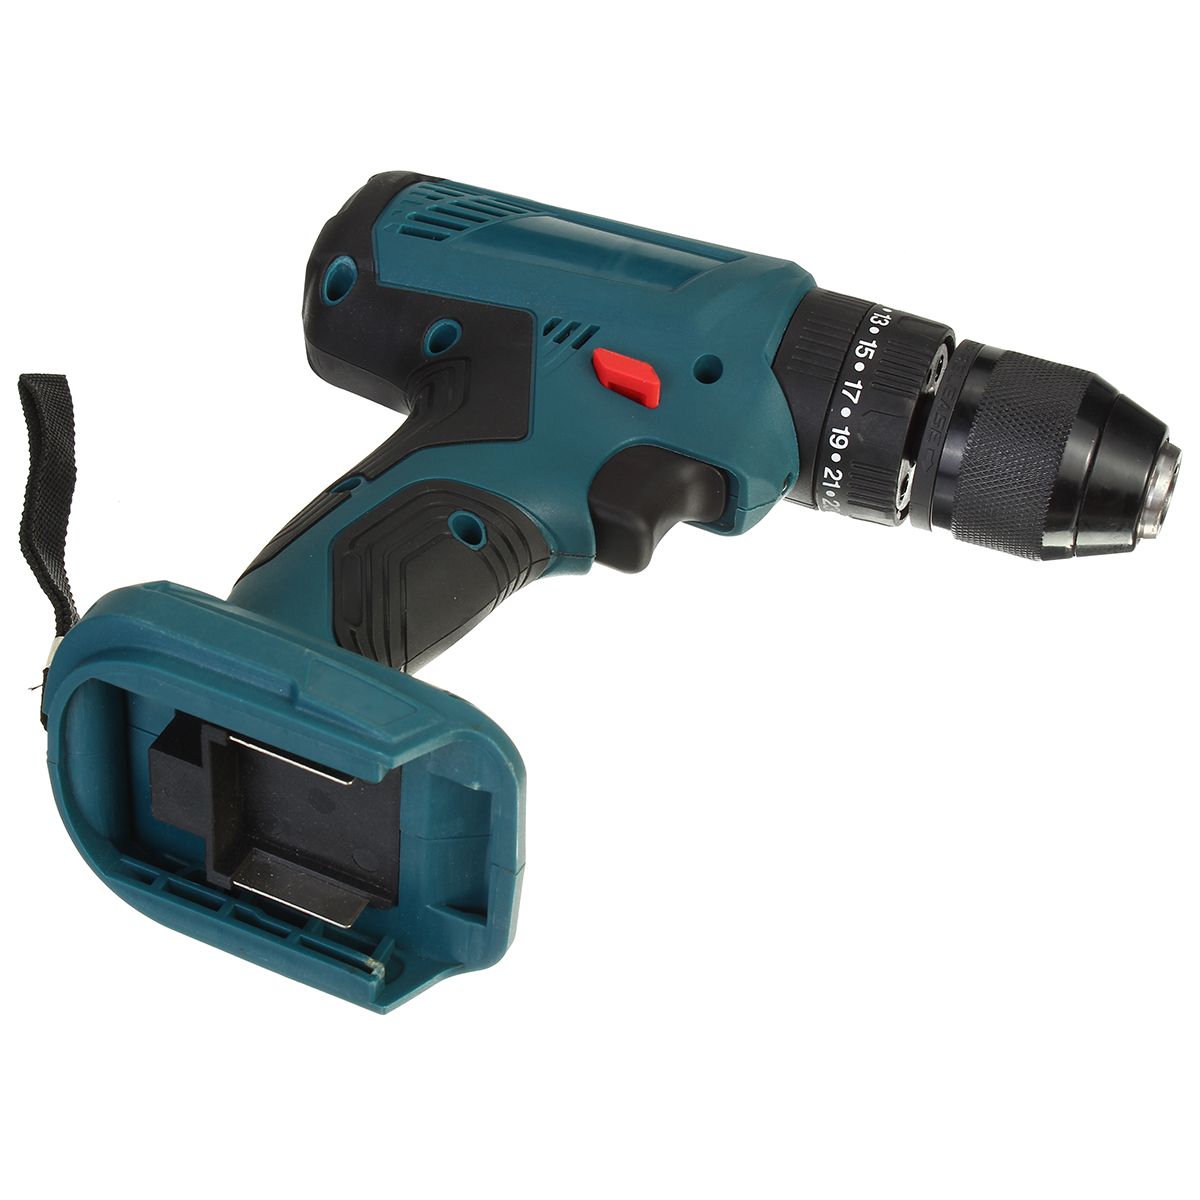 3-In-1-Cordless-Rechargeable-Electric-Screwdriver-Impact-Drill-10mm-for-18V-Makita-Battery-1704029